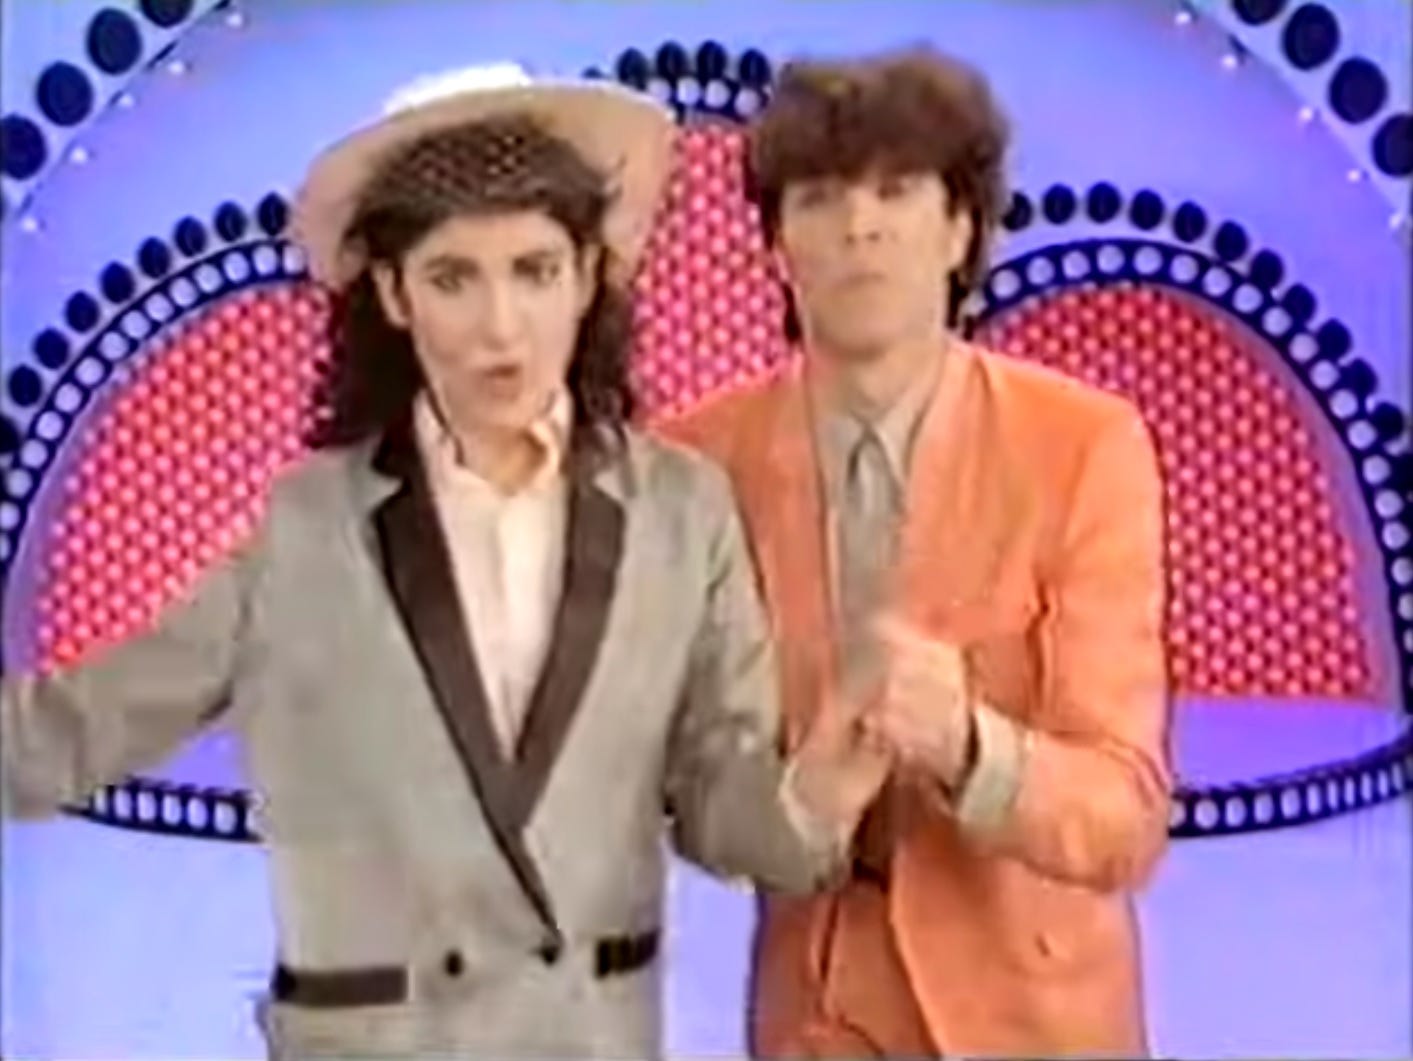 Russell Mael and Jane Wiedlin.